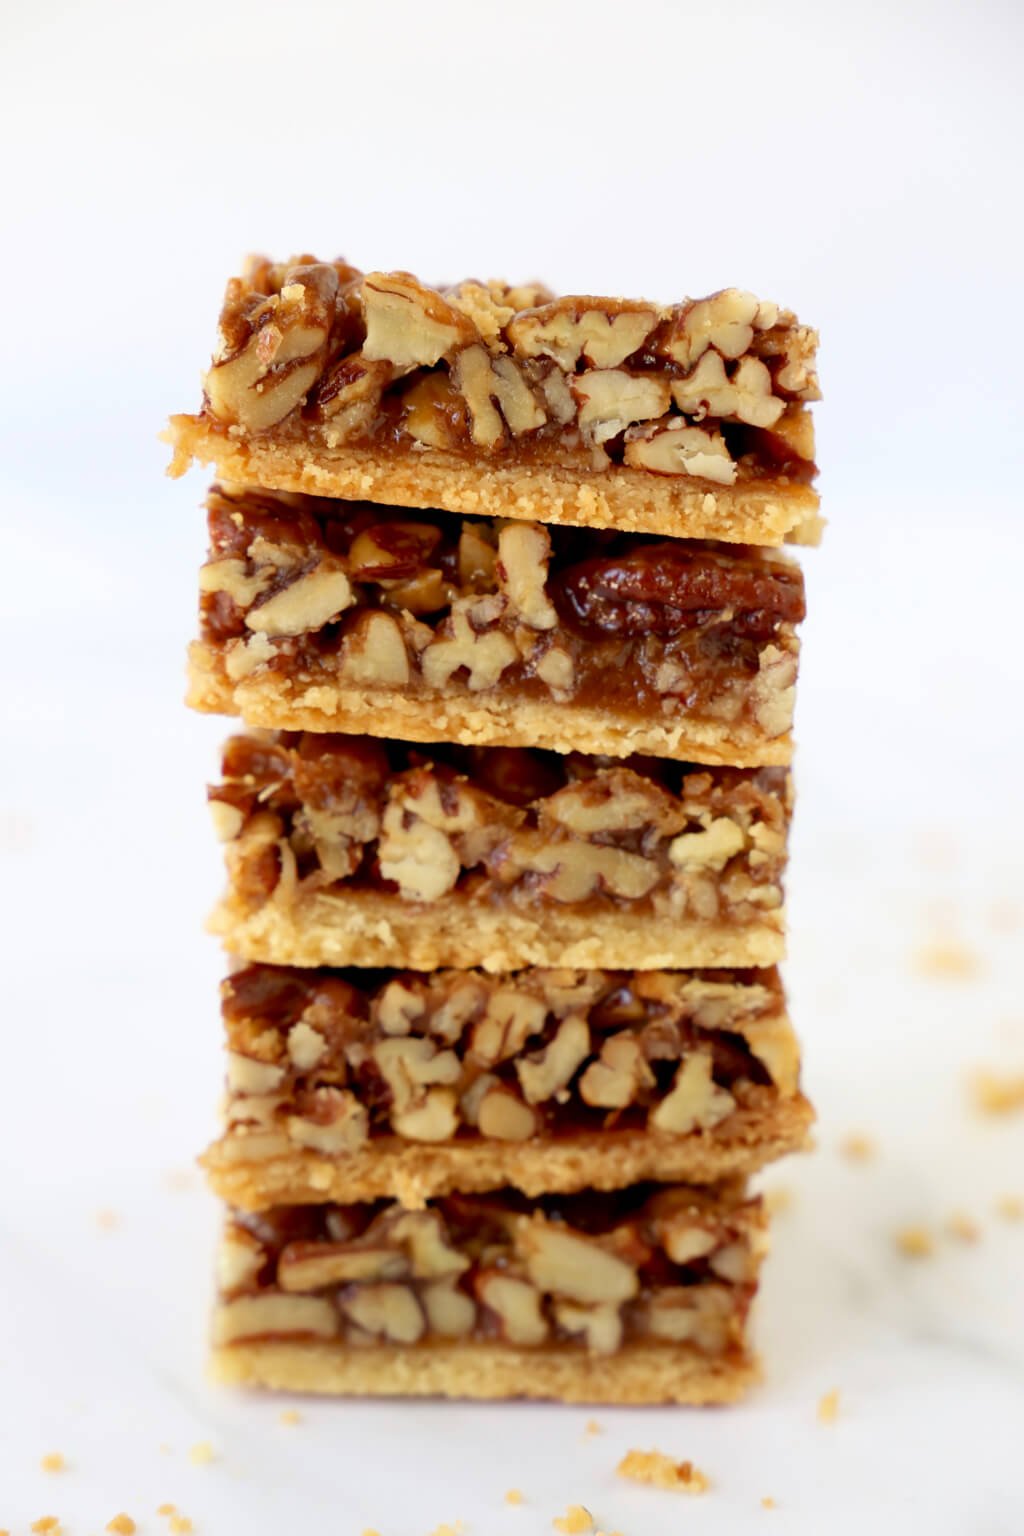 5 chewy pecan bars stacked on top of each other